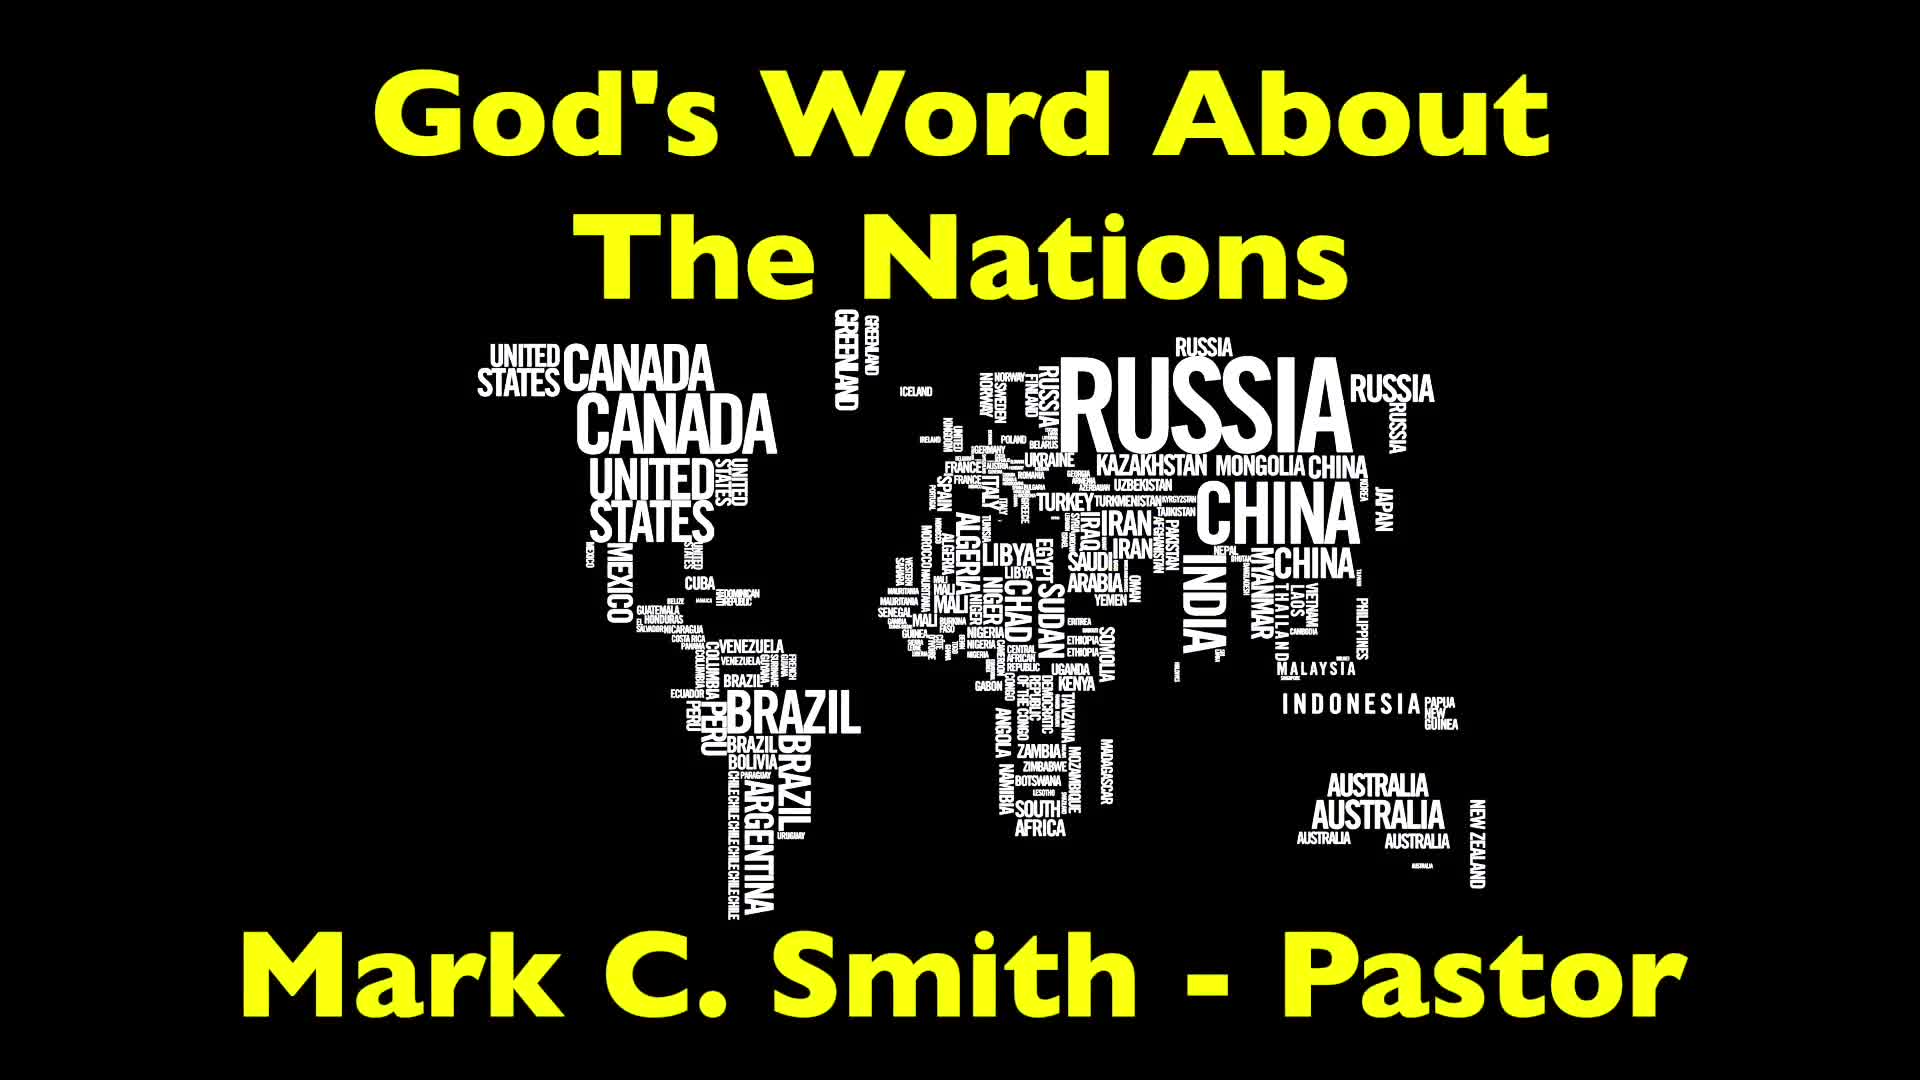 God's Word About The Nations